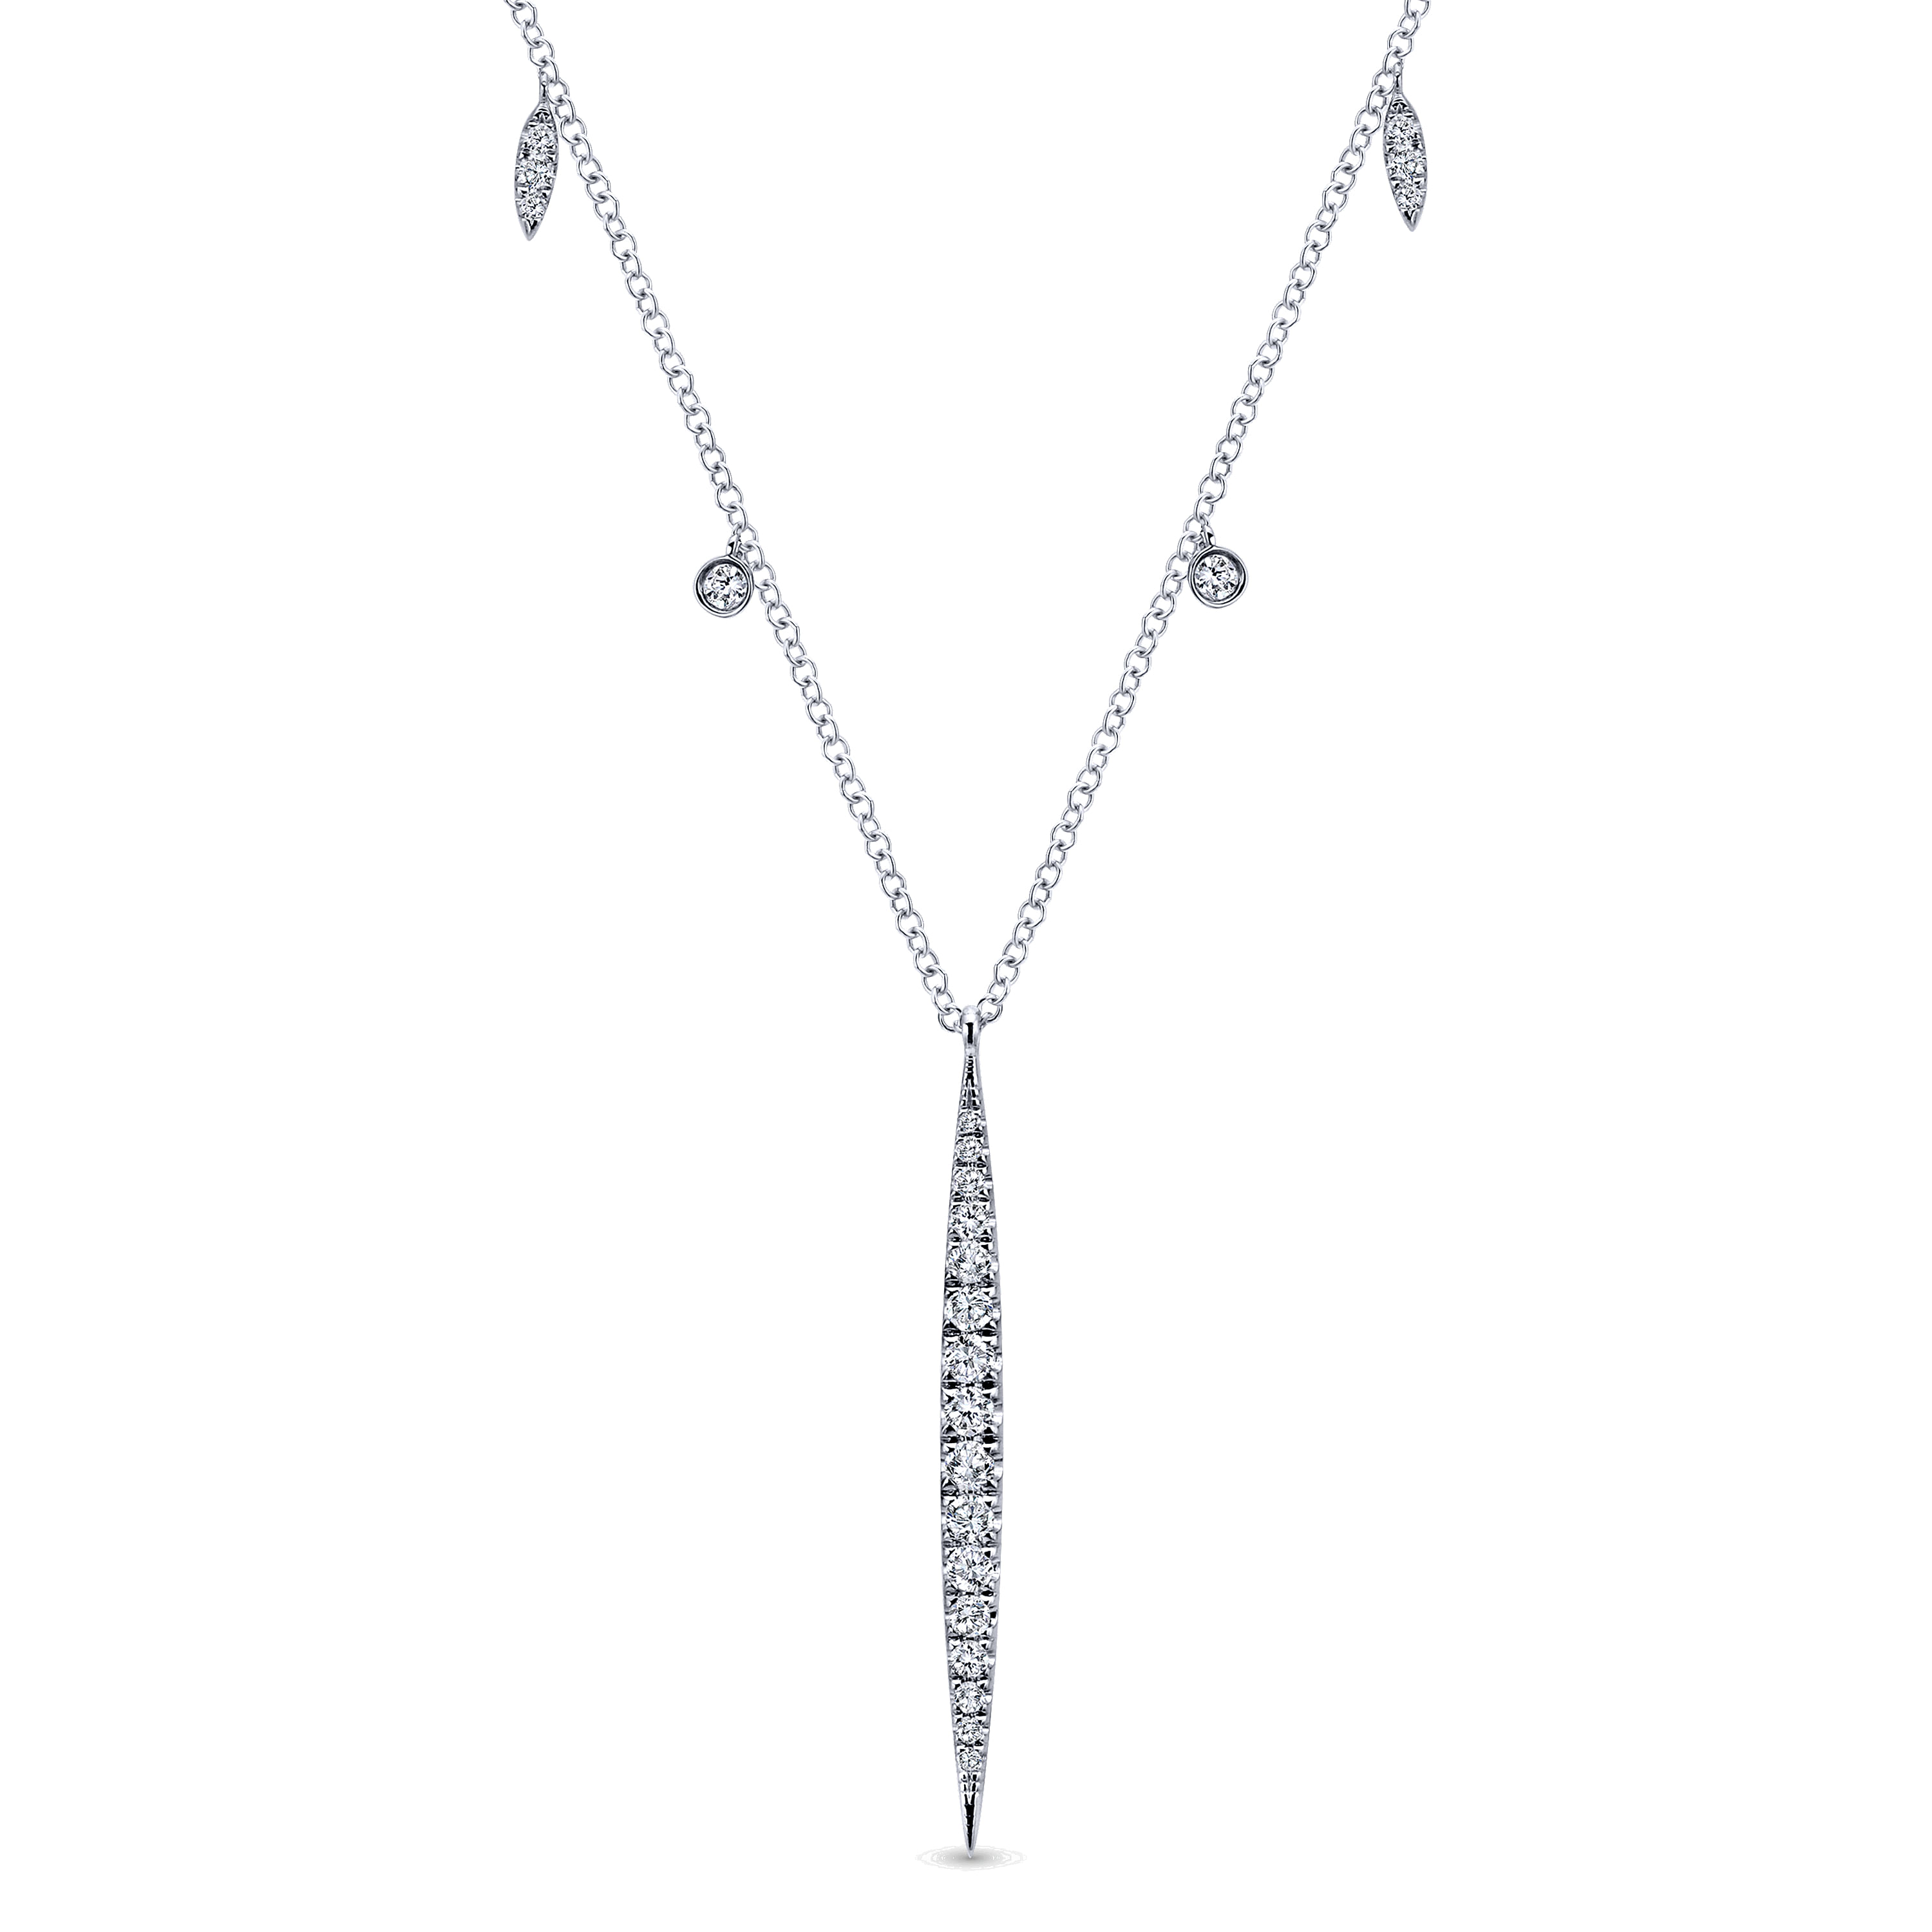 Gabriel - 14K White Gold Diamond Spear Pendant Necklace with Chain Drops